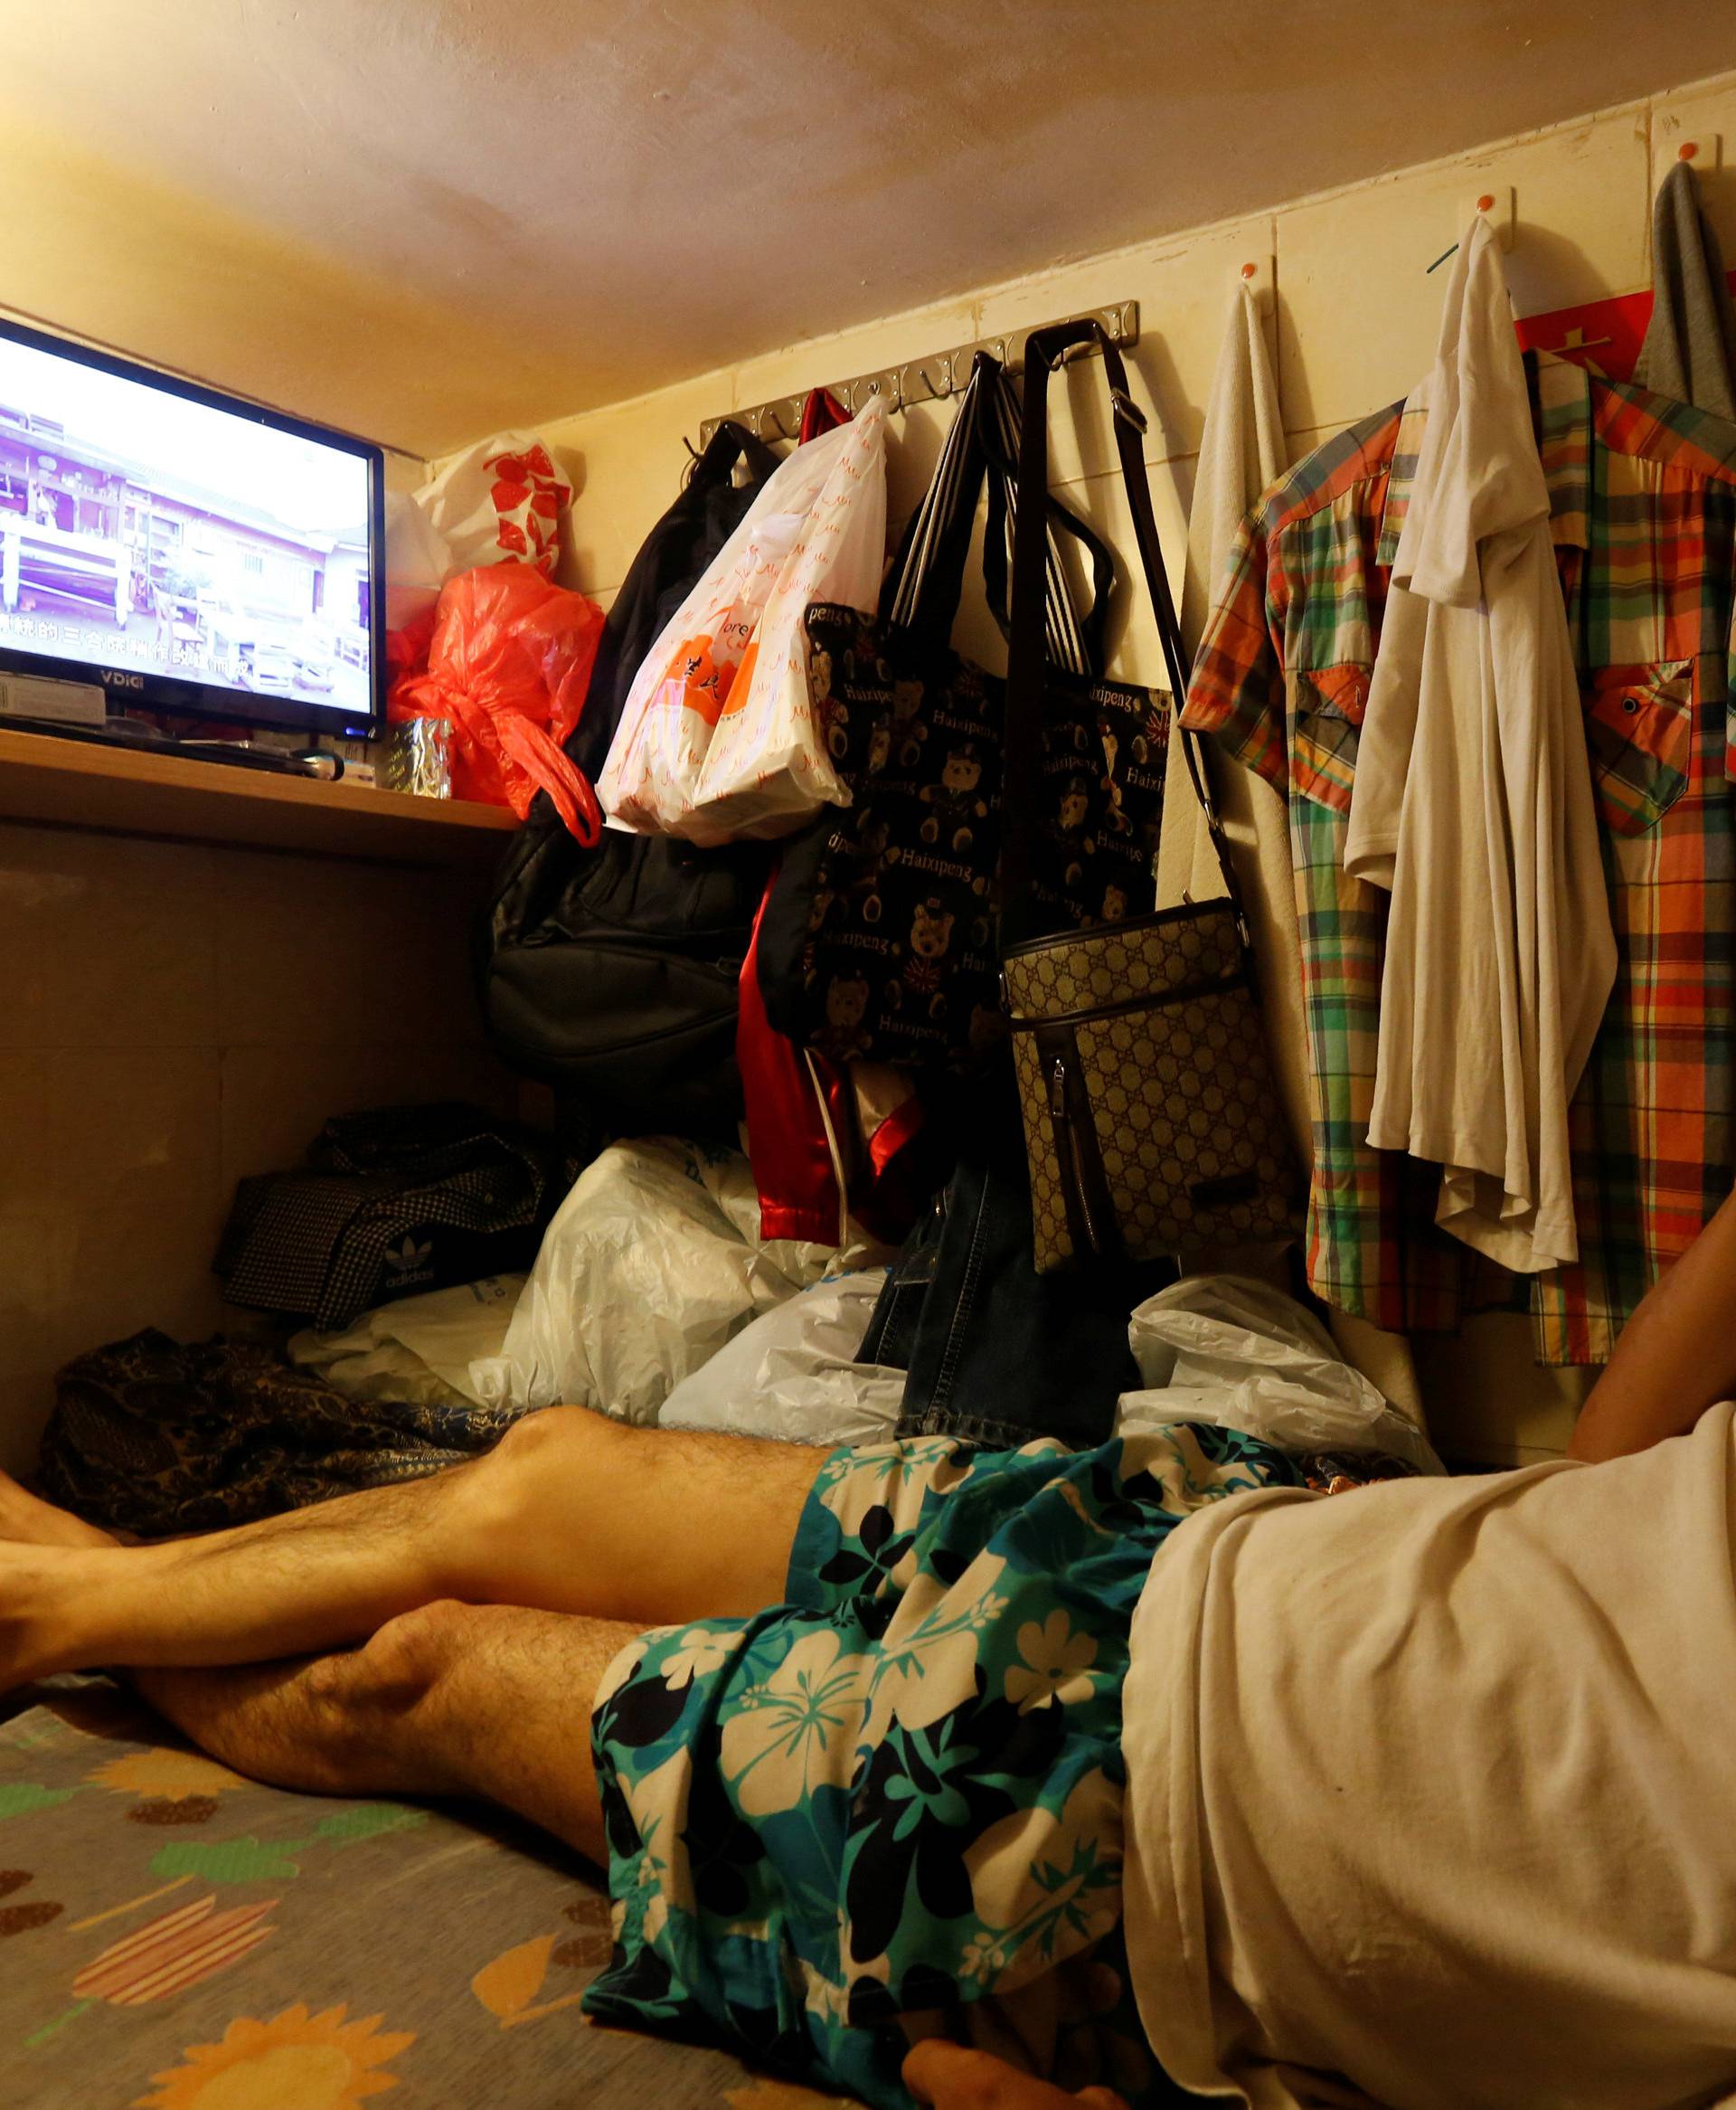 Unemployed Hong Kong resident Simon Wong, 61, watches TV inside his 4-by-6-feet partitioned unit, or "coffin unit", with a monthly rent of HK$1,750 ($226) in Hong Kong